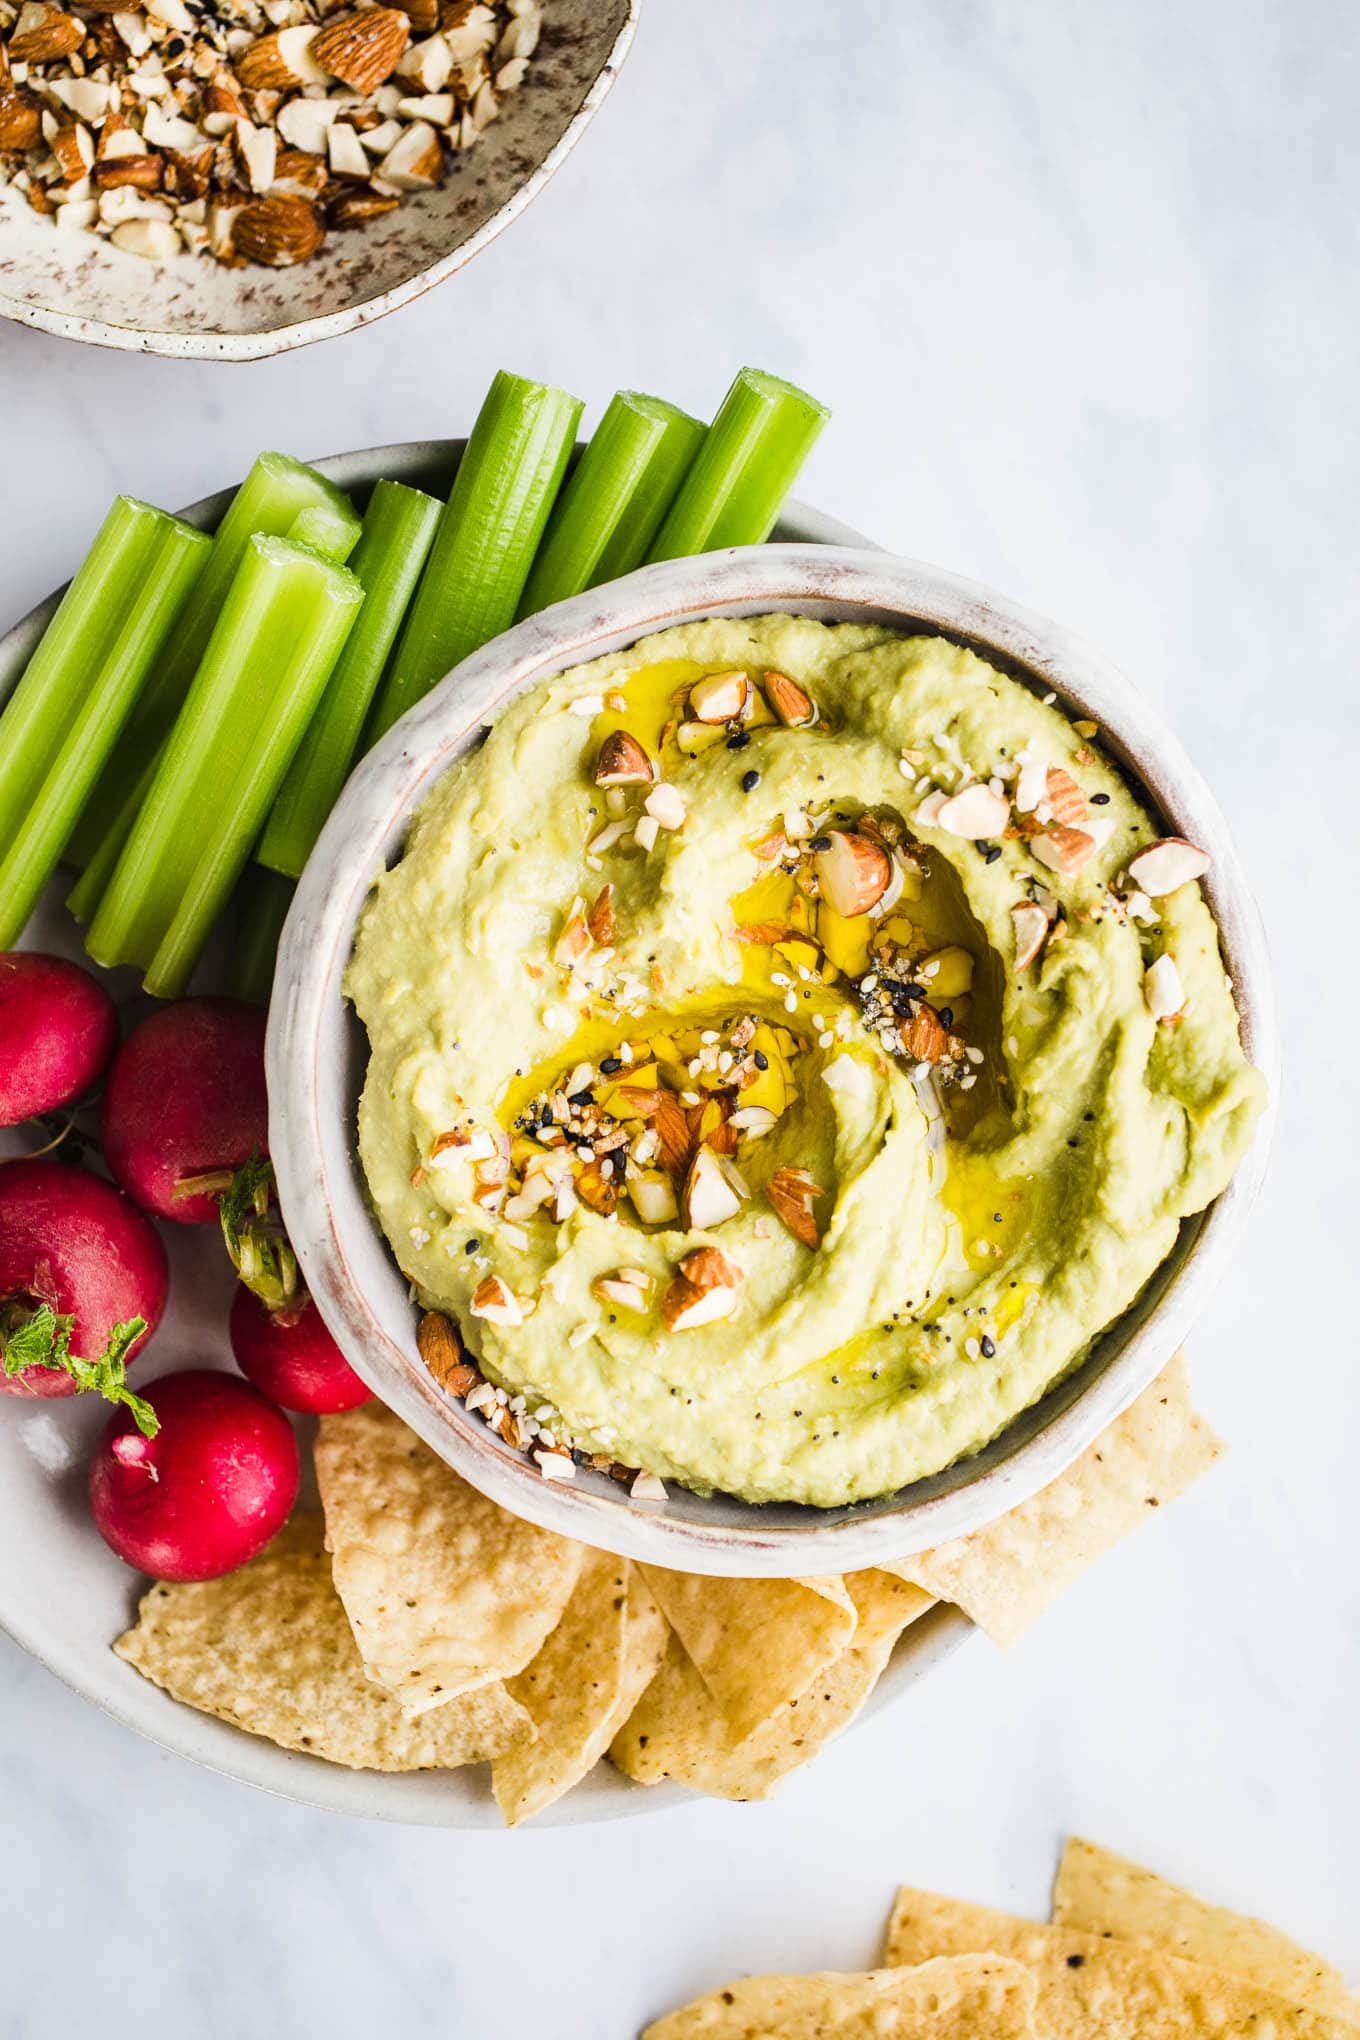 A gluten-free dairy-free snack of green avocado hummus in a white bowl with veggies and tortilla chips.